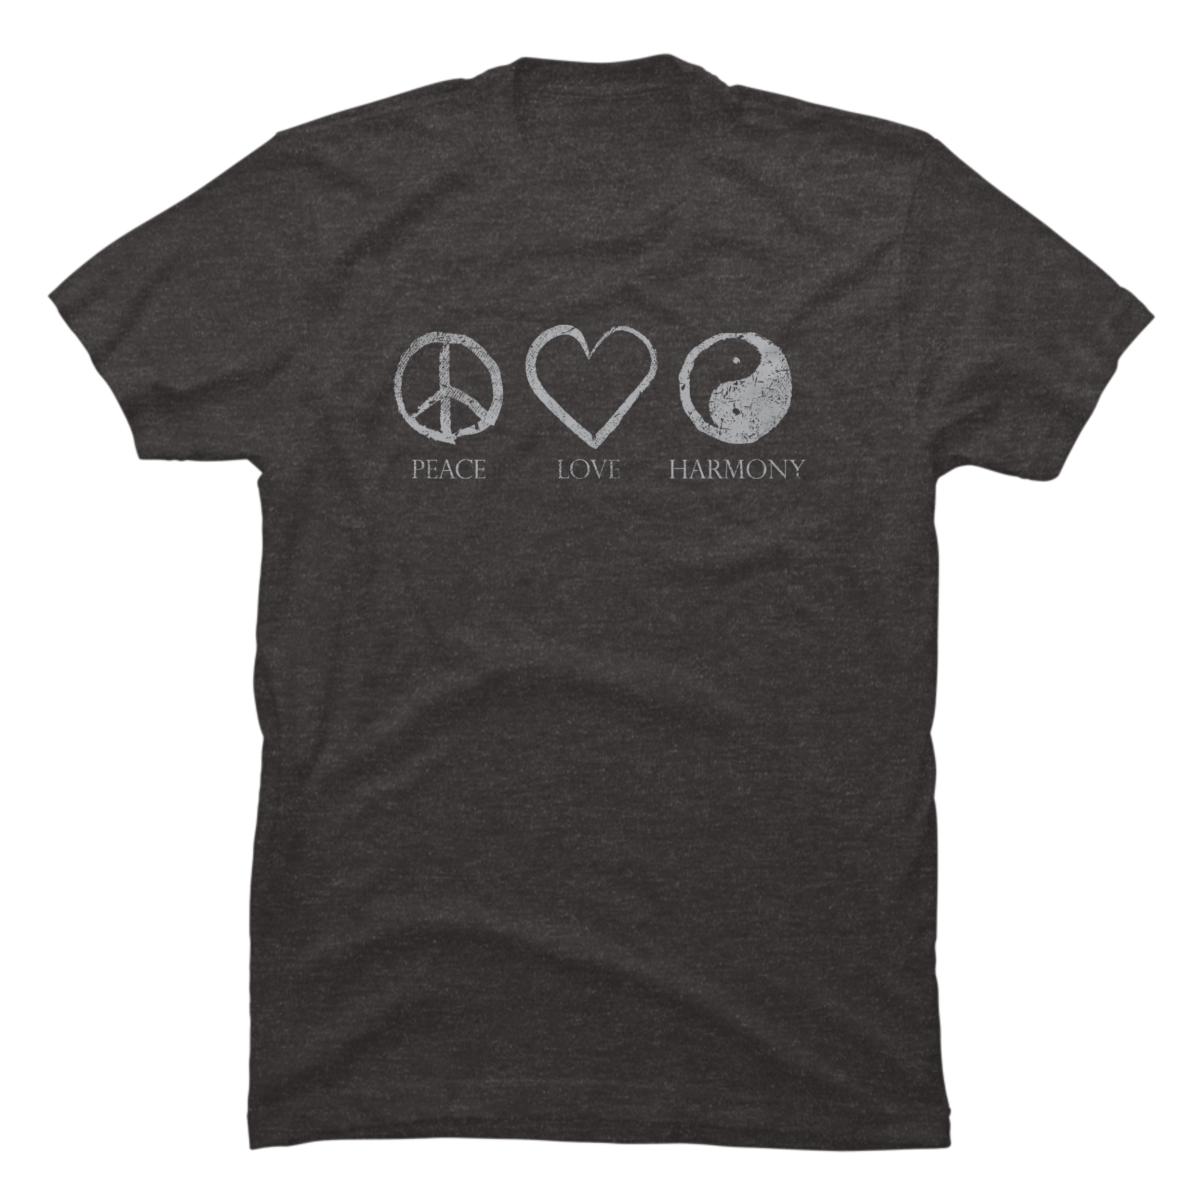 peace and love t shirt designs